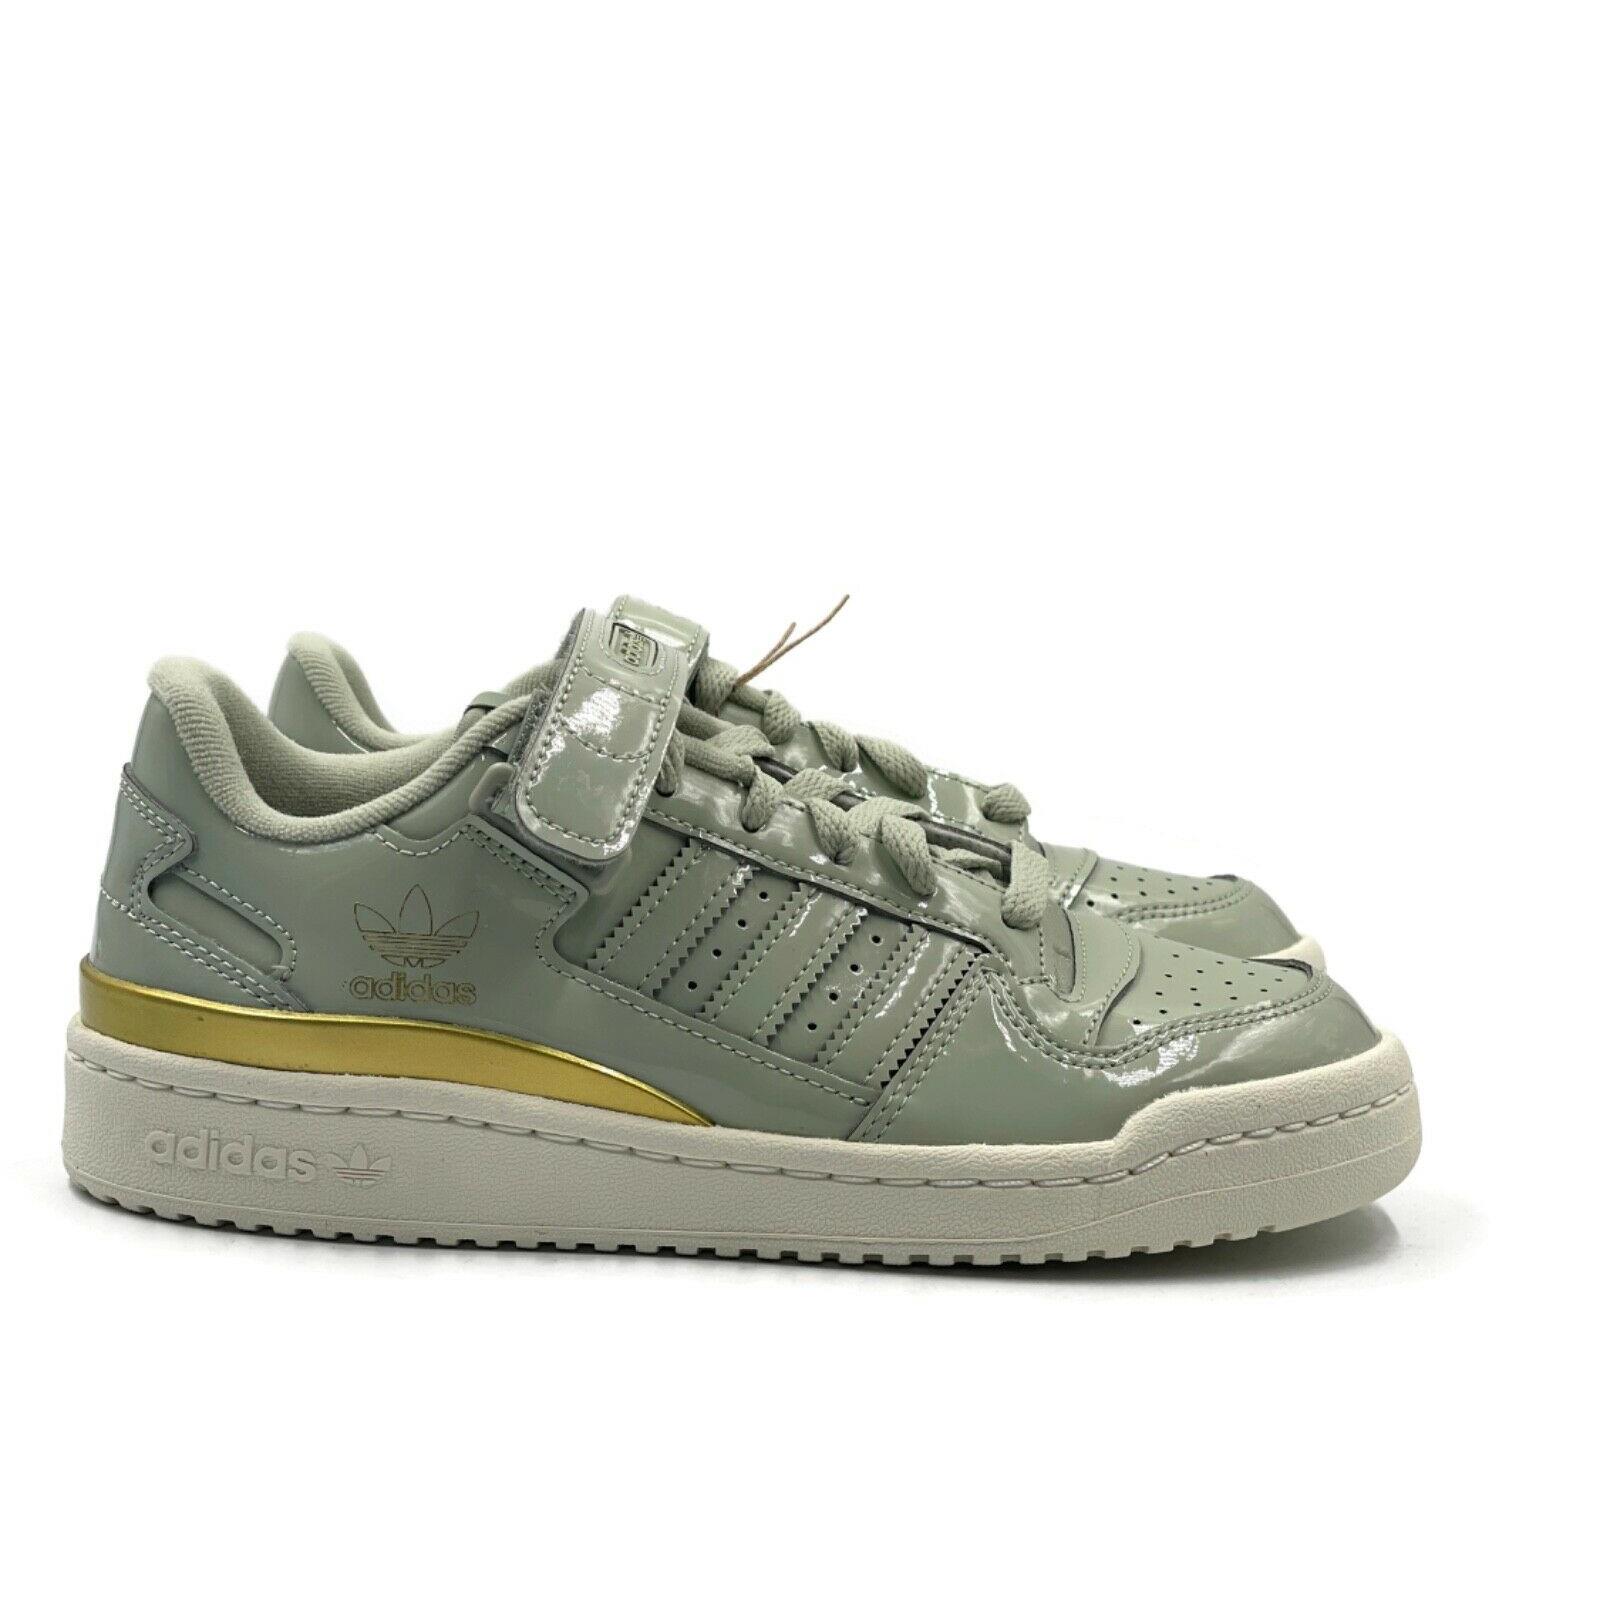 Adidas Forum Low Womens Casual Retro Shoe Green Patent White Trainer Sneaker